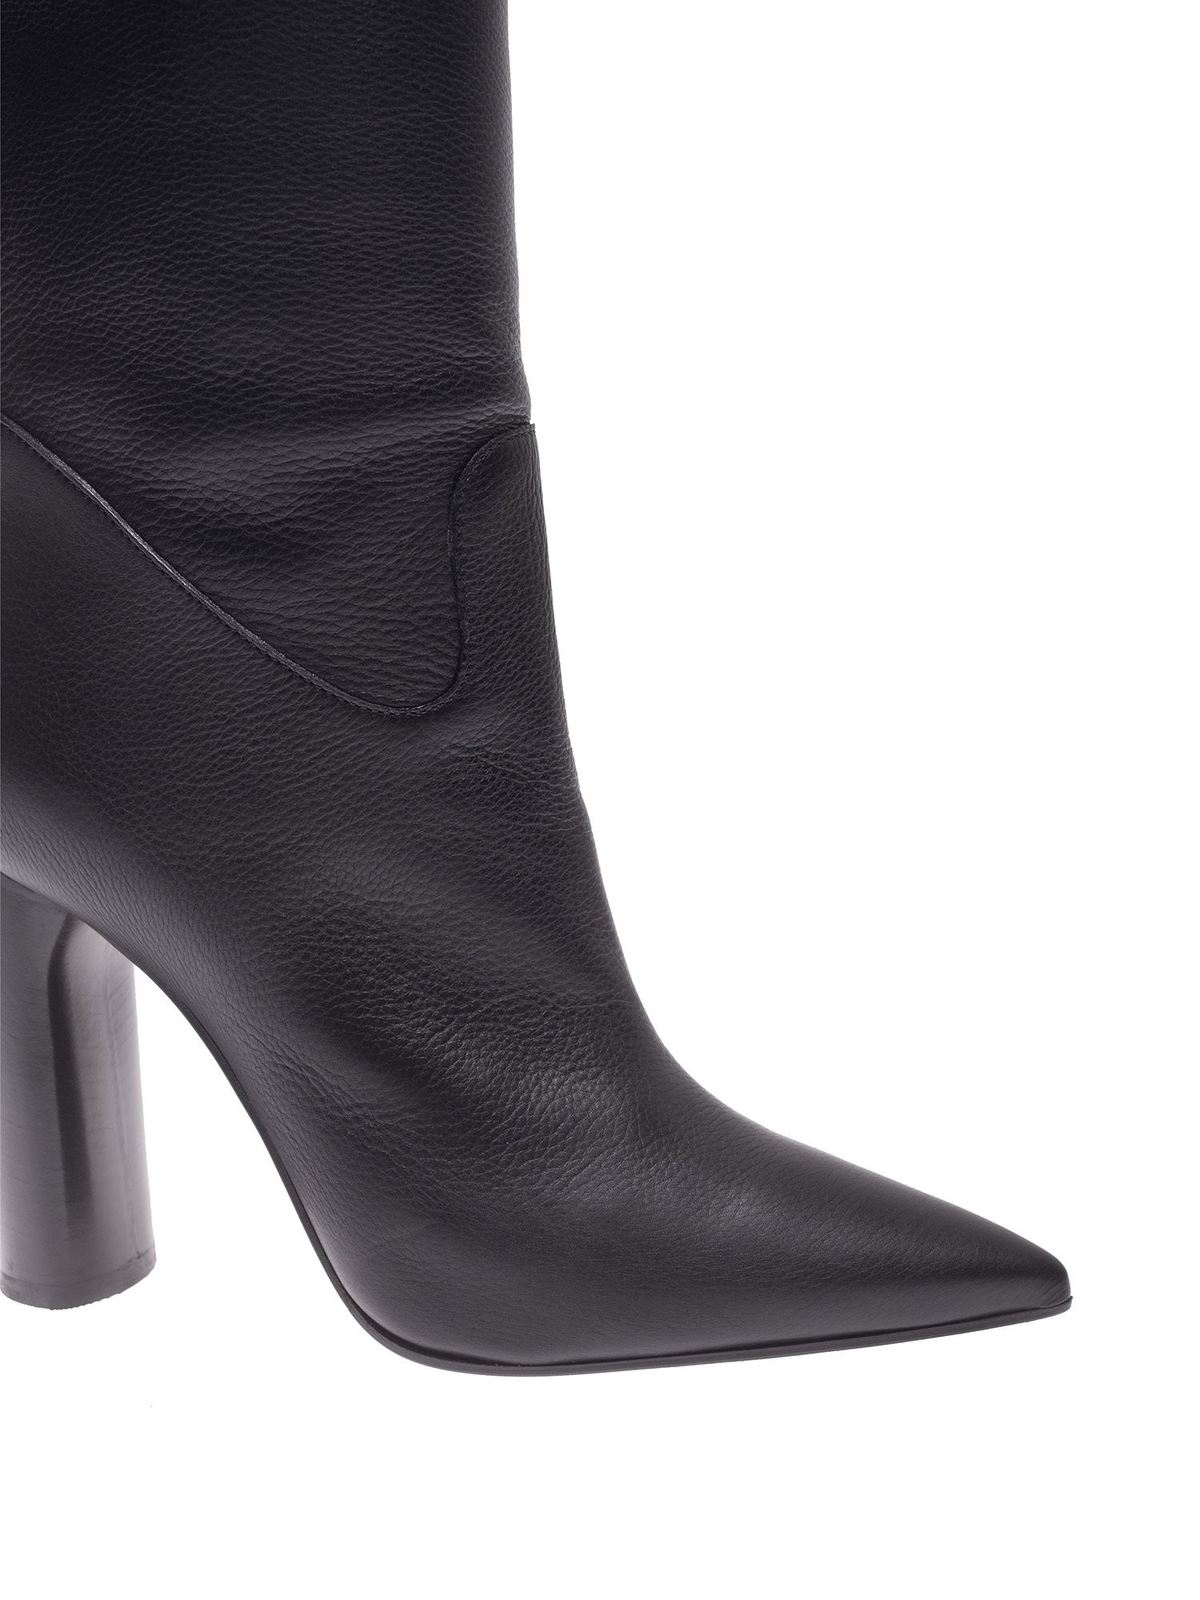 Casadei - Pointed toe boots in black - boots - 1S072R100GTANGO9000